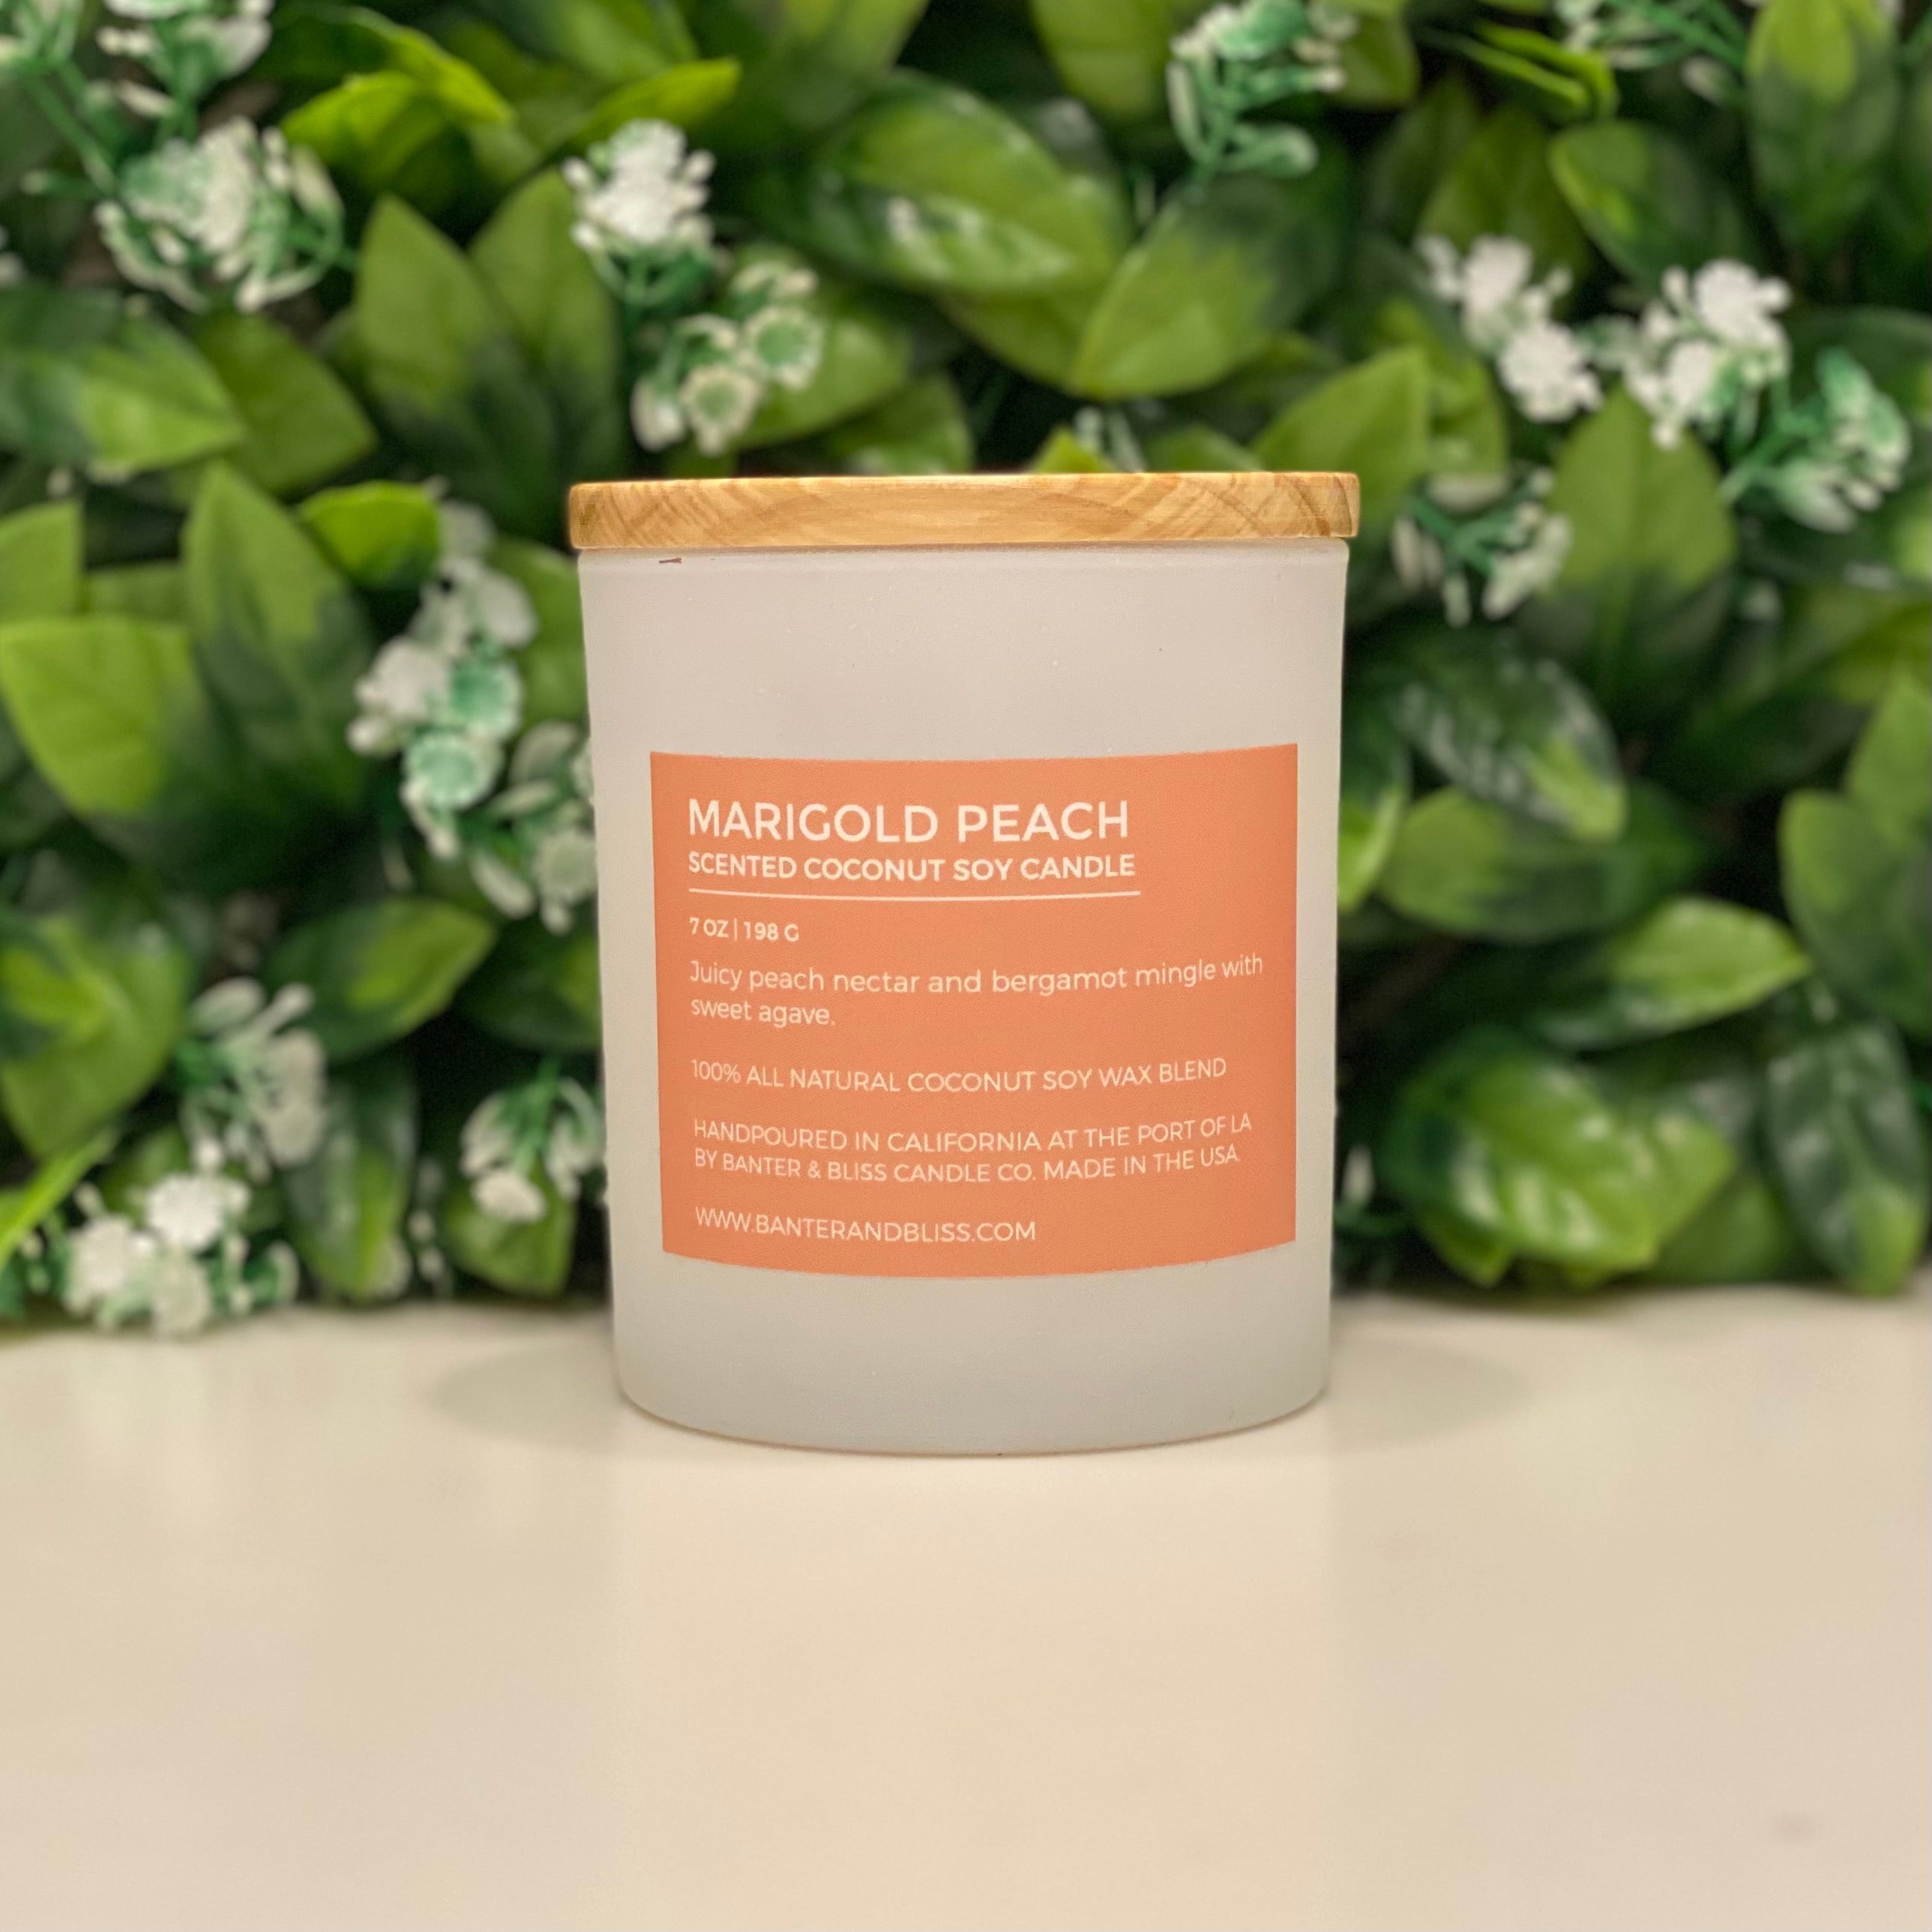 Marigold Peach. 7 oz. Scented Coconut Soy Candle.